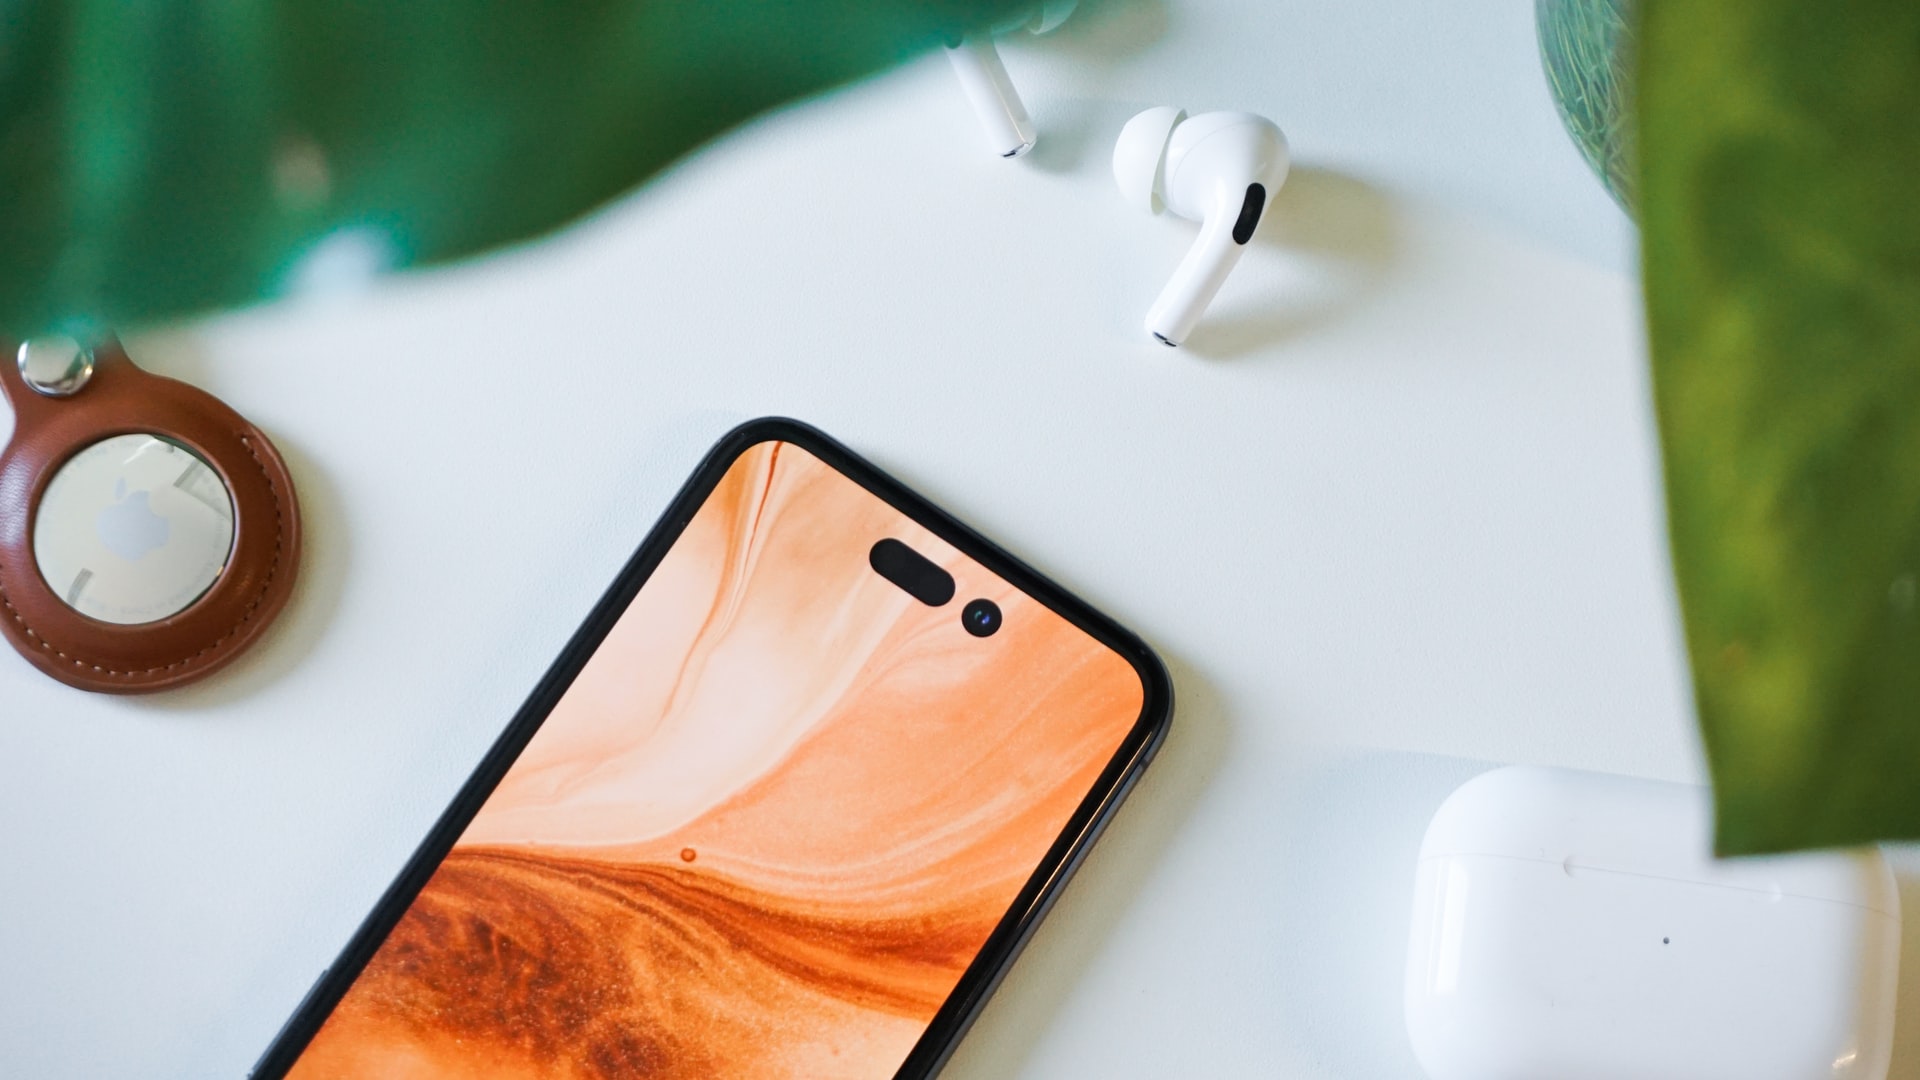 iphone on table with airpods